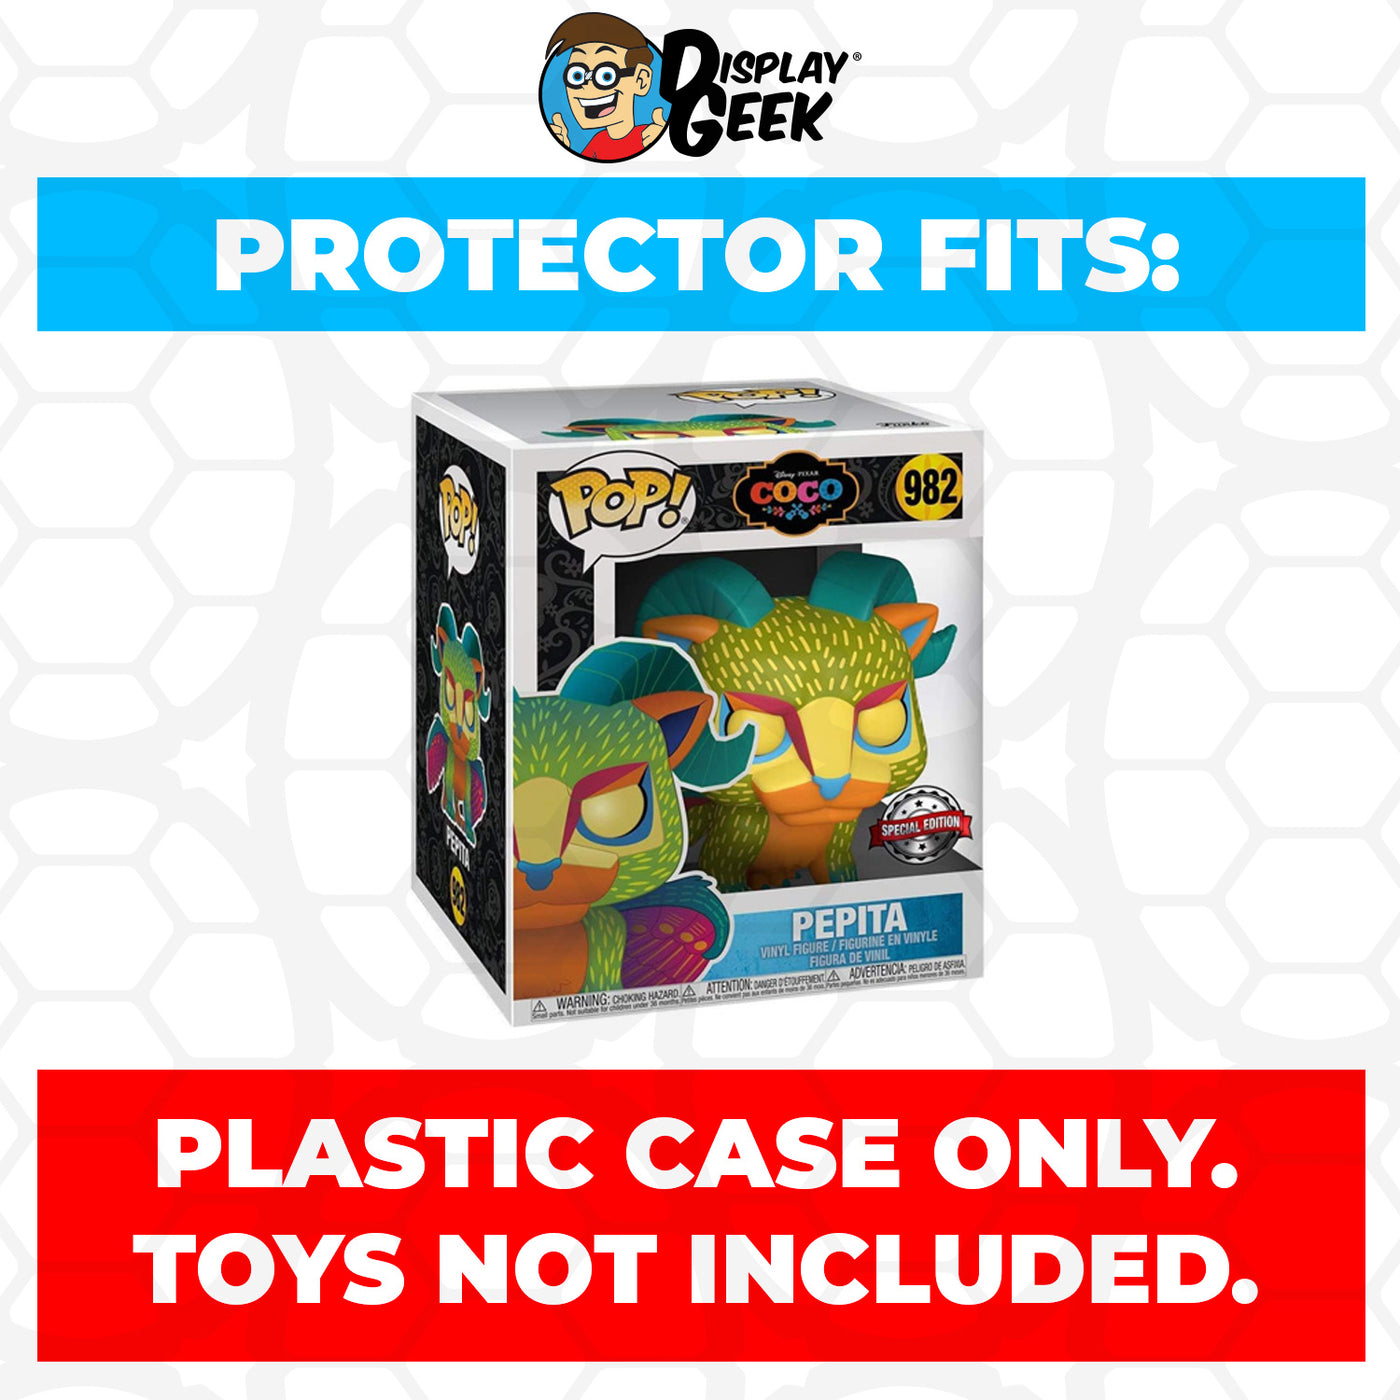 Pop Protector for 6 inch Pepita Glow #982 Super Size Funko Pop on The Protector Guide App by Display Geek